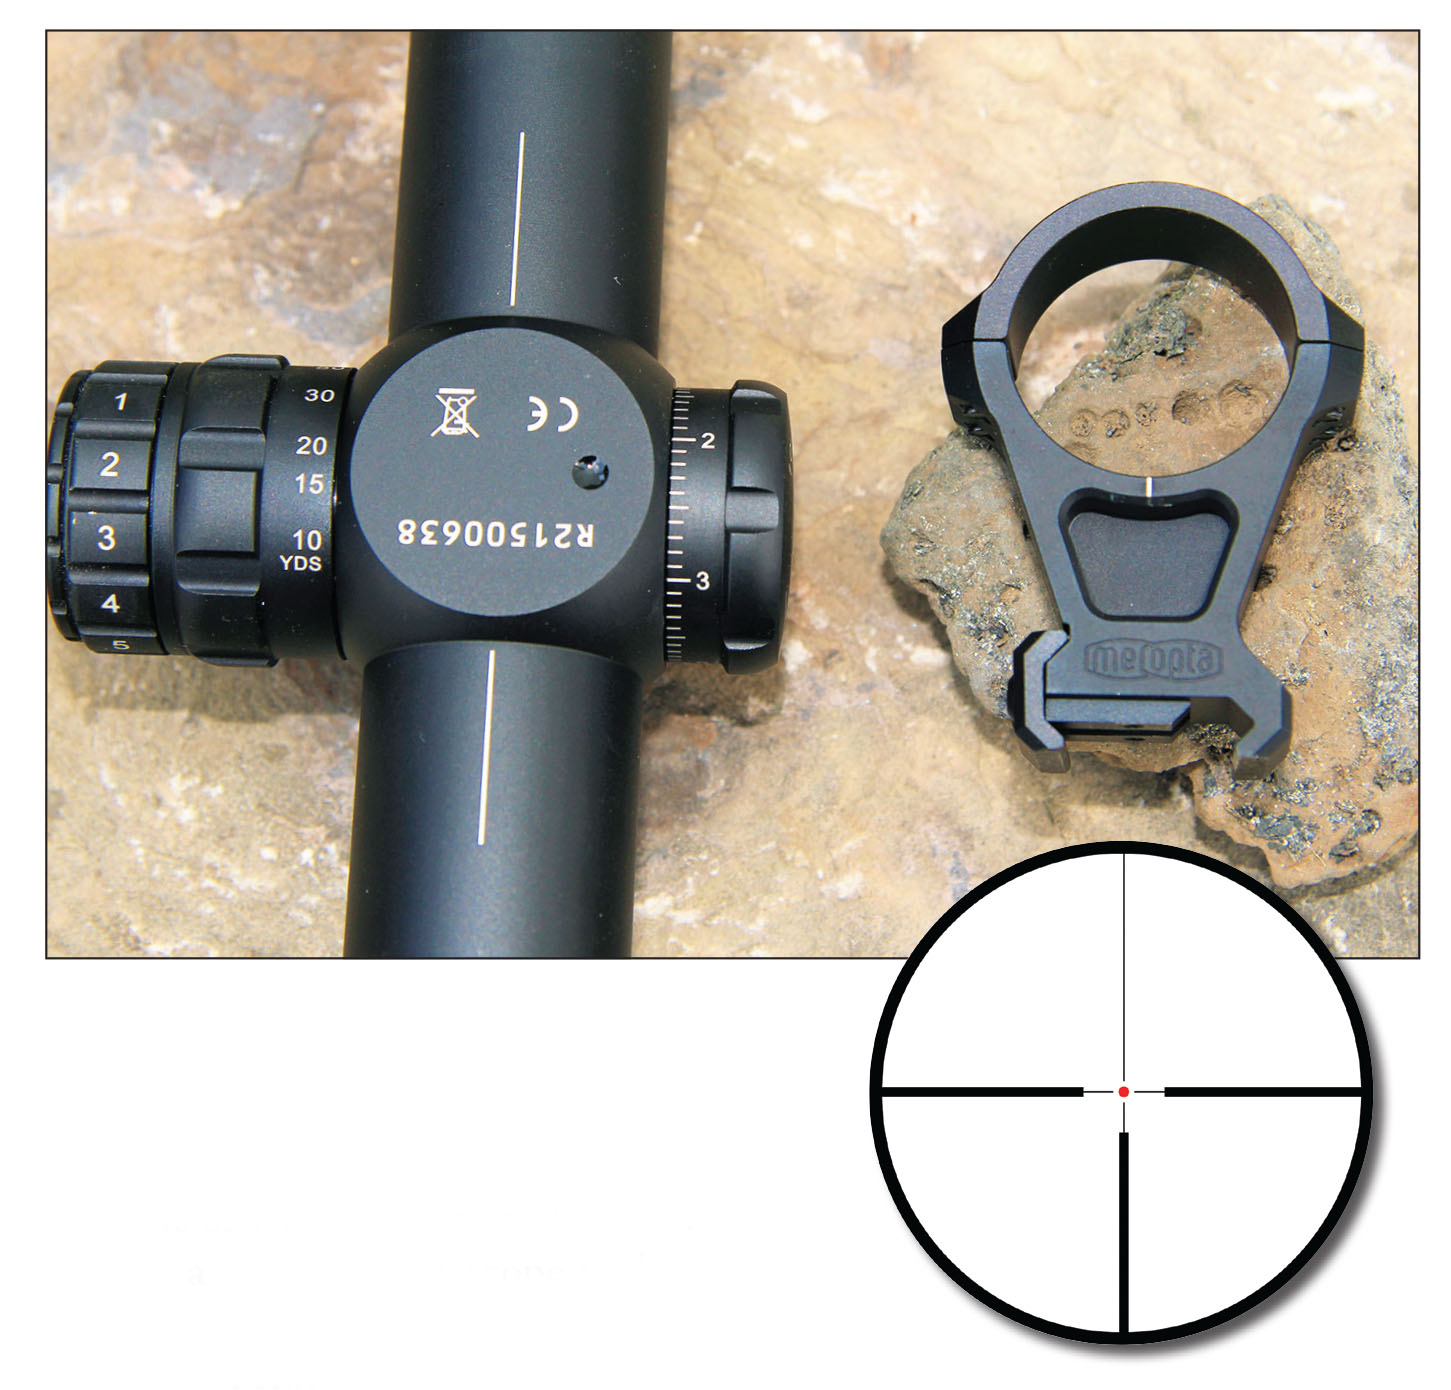 Meopta’s new MeoSport line comes with rings that include alignment marks that corelate to hash marks on the underneath of the scope body, ensuring perfect alignment and level scope mounting.